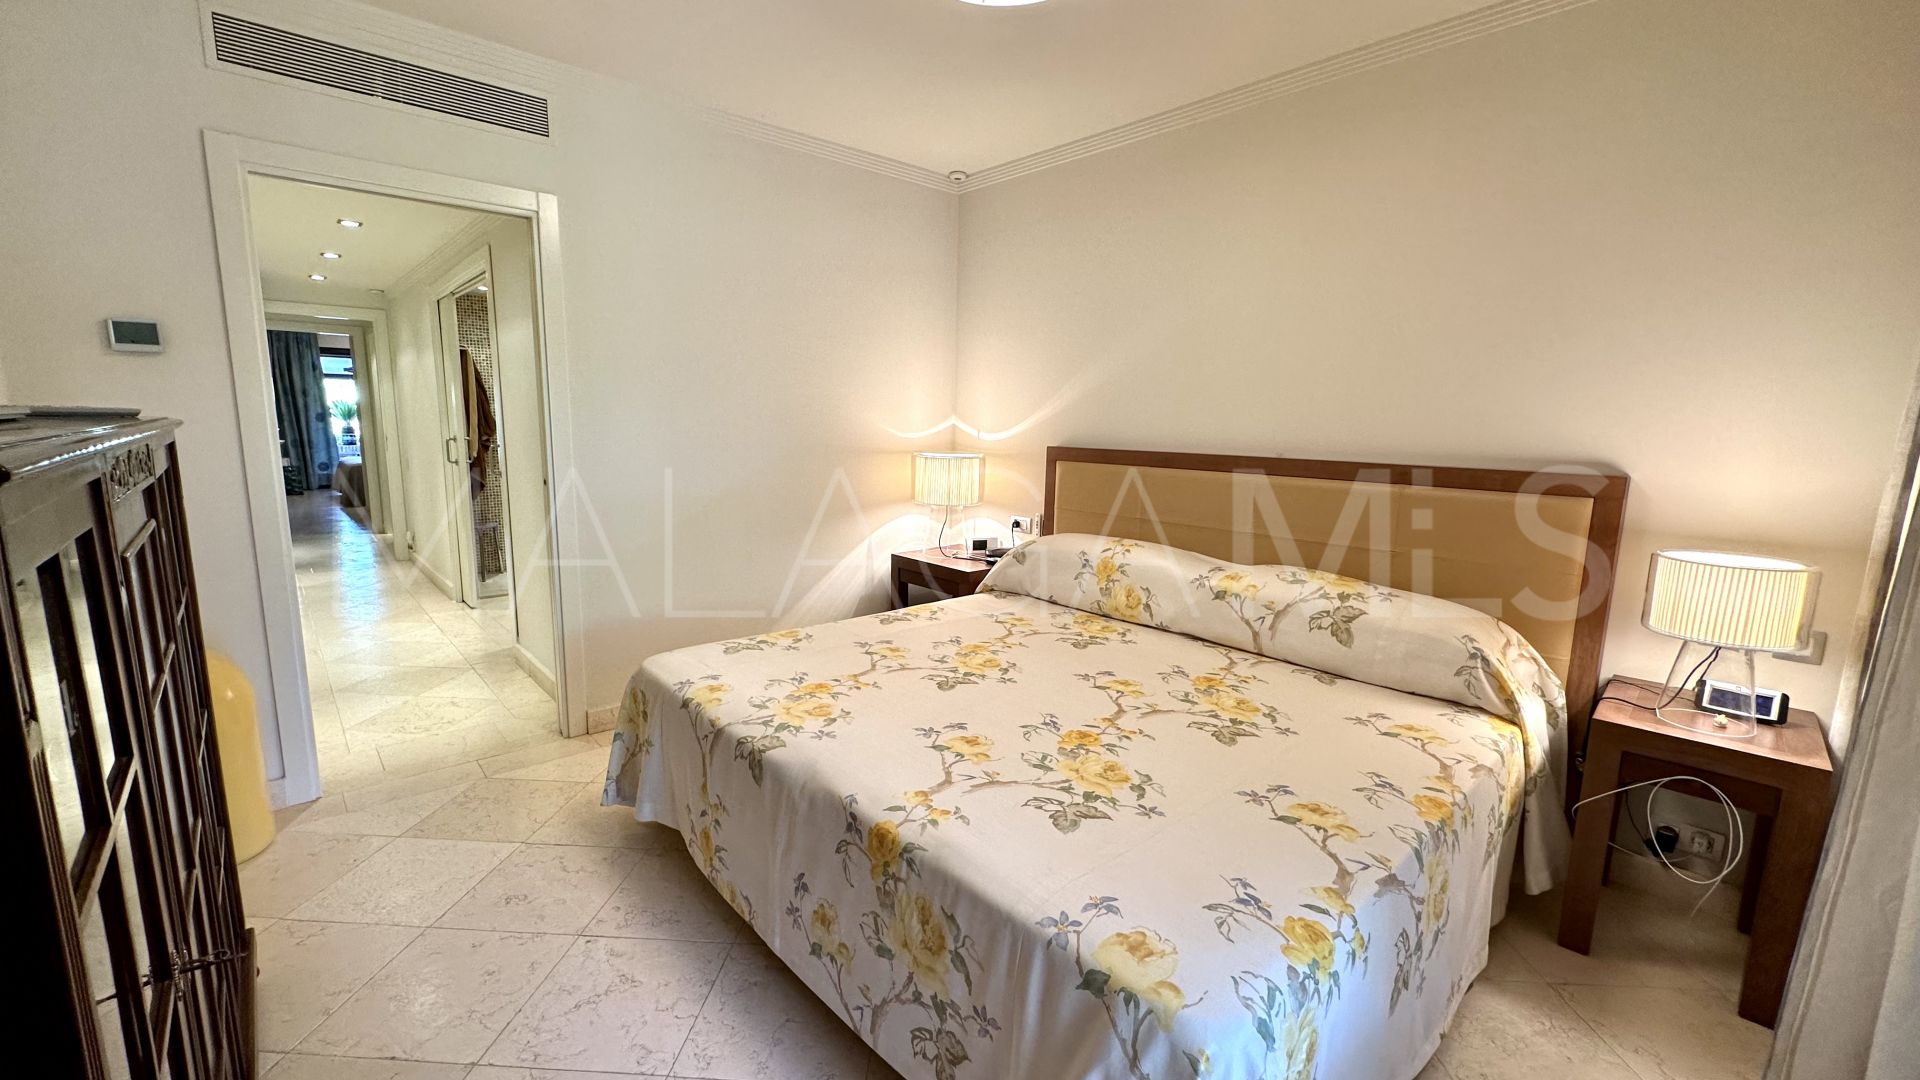 For sale Casasola 3 bedrooms ground floor apartment